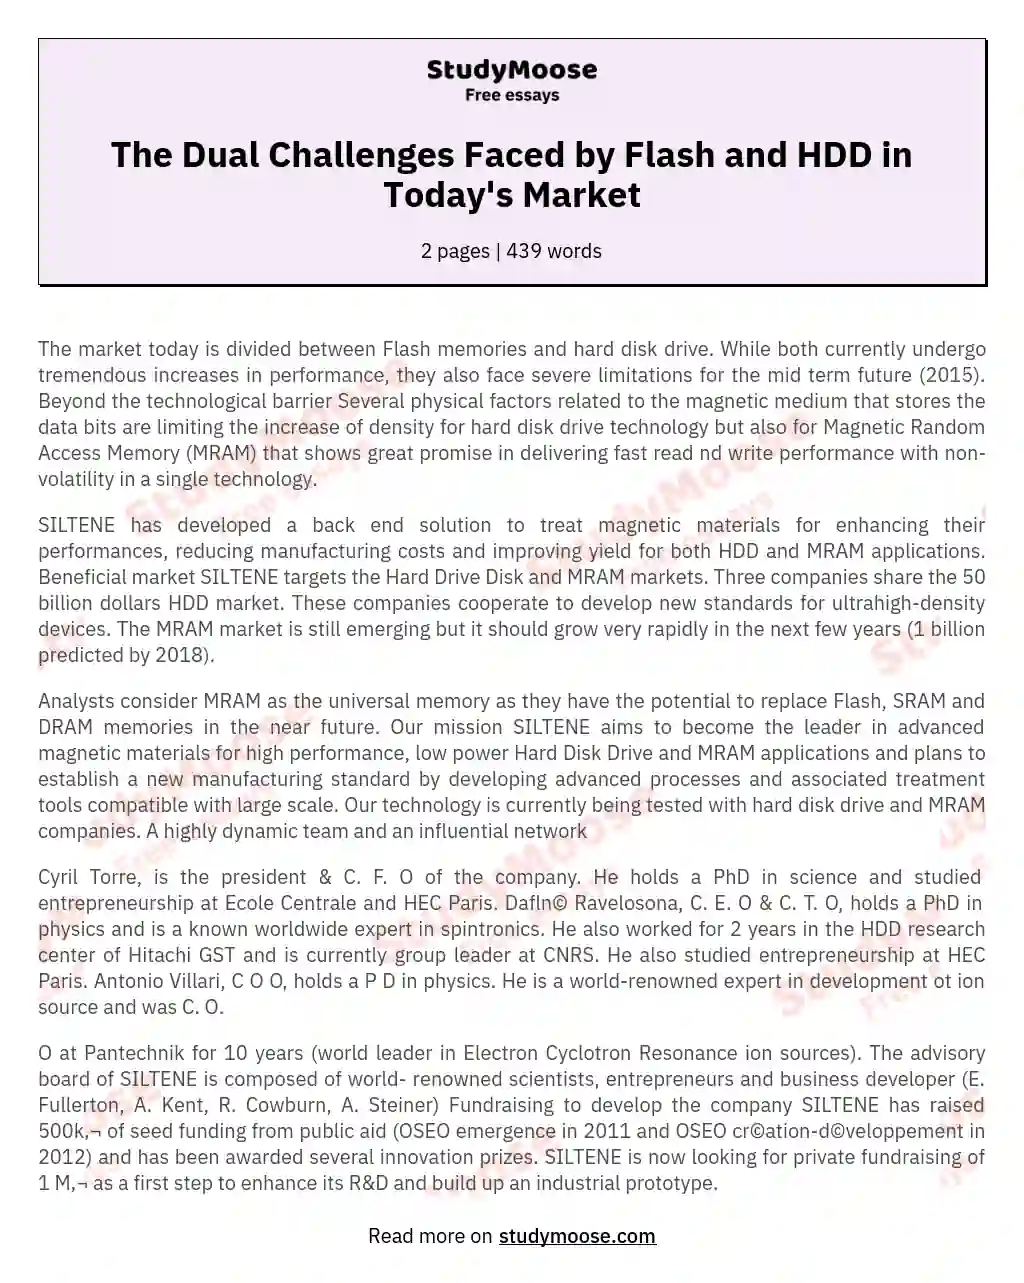 The Dual Challenges Faced by Flash and HDD in Today's Market essay